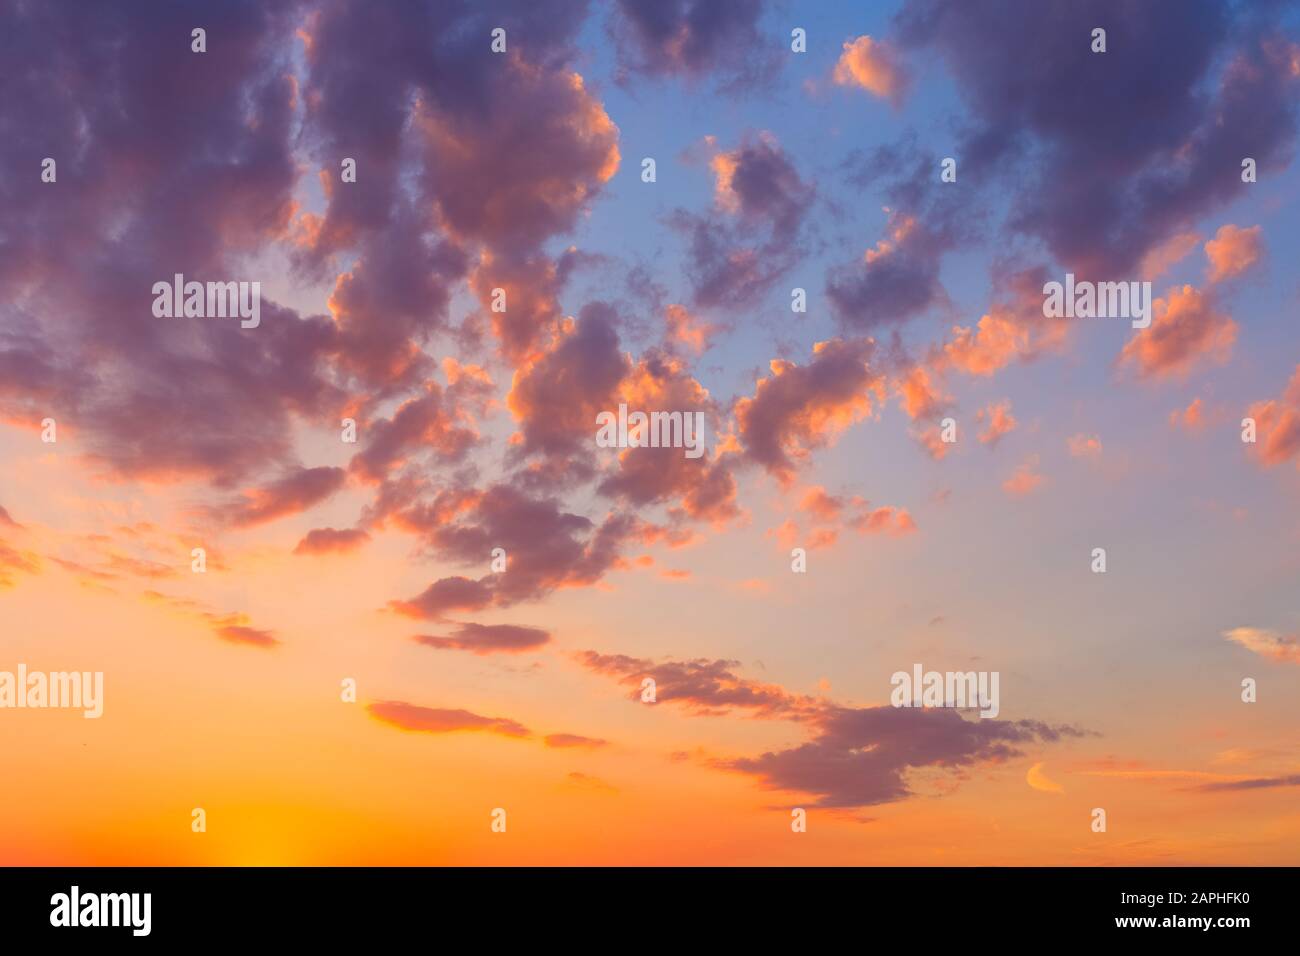 Fantastic Beautiful Dramatic Sunset Sky With Clouds Free Space Stock Photo Alamy